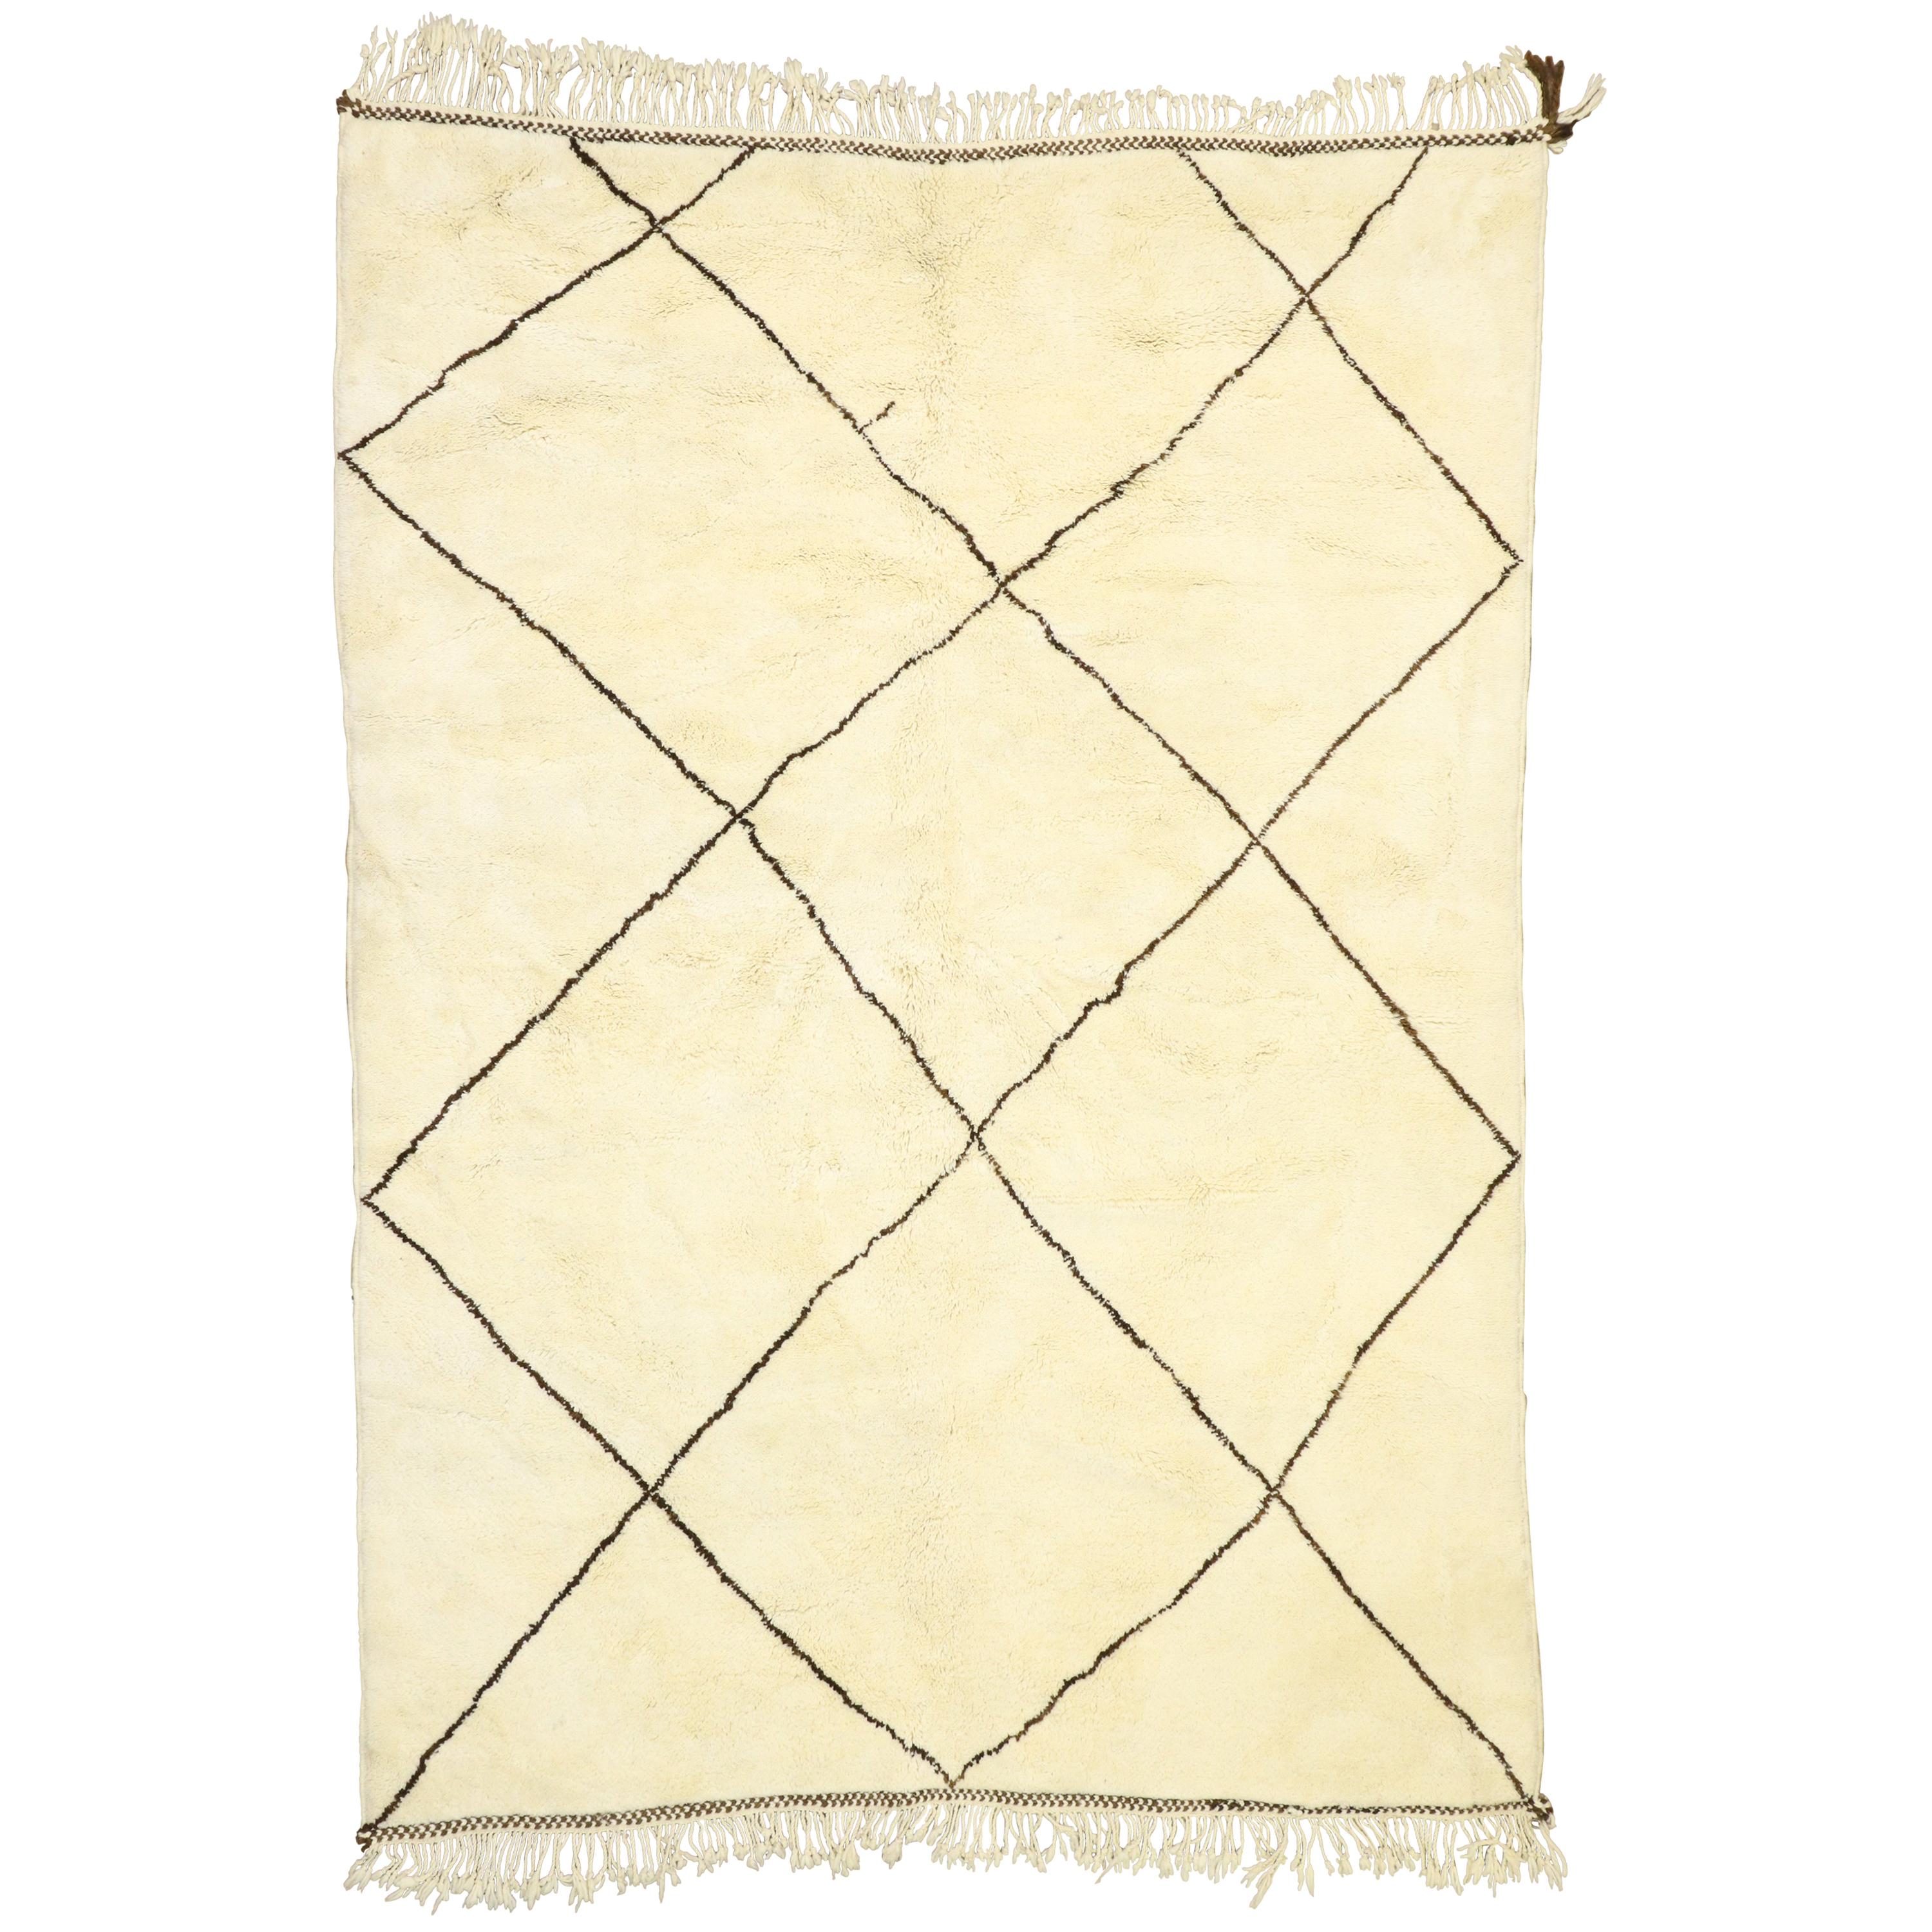 New Contemporary Modern Beni Ourain Moroccan Rug with Minimalist Style